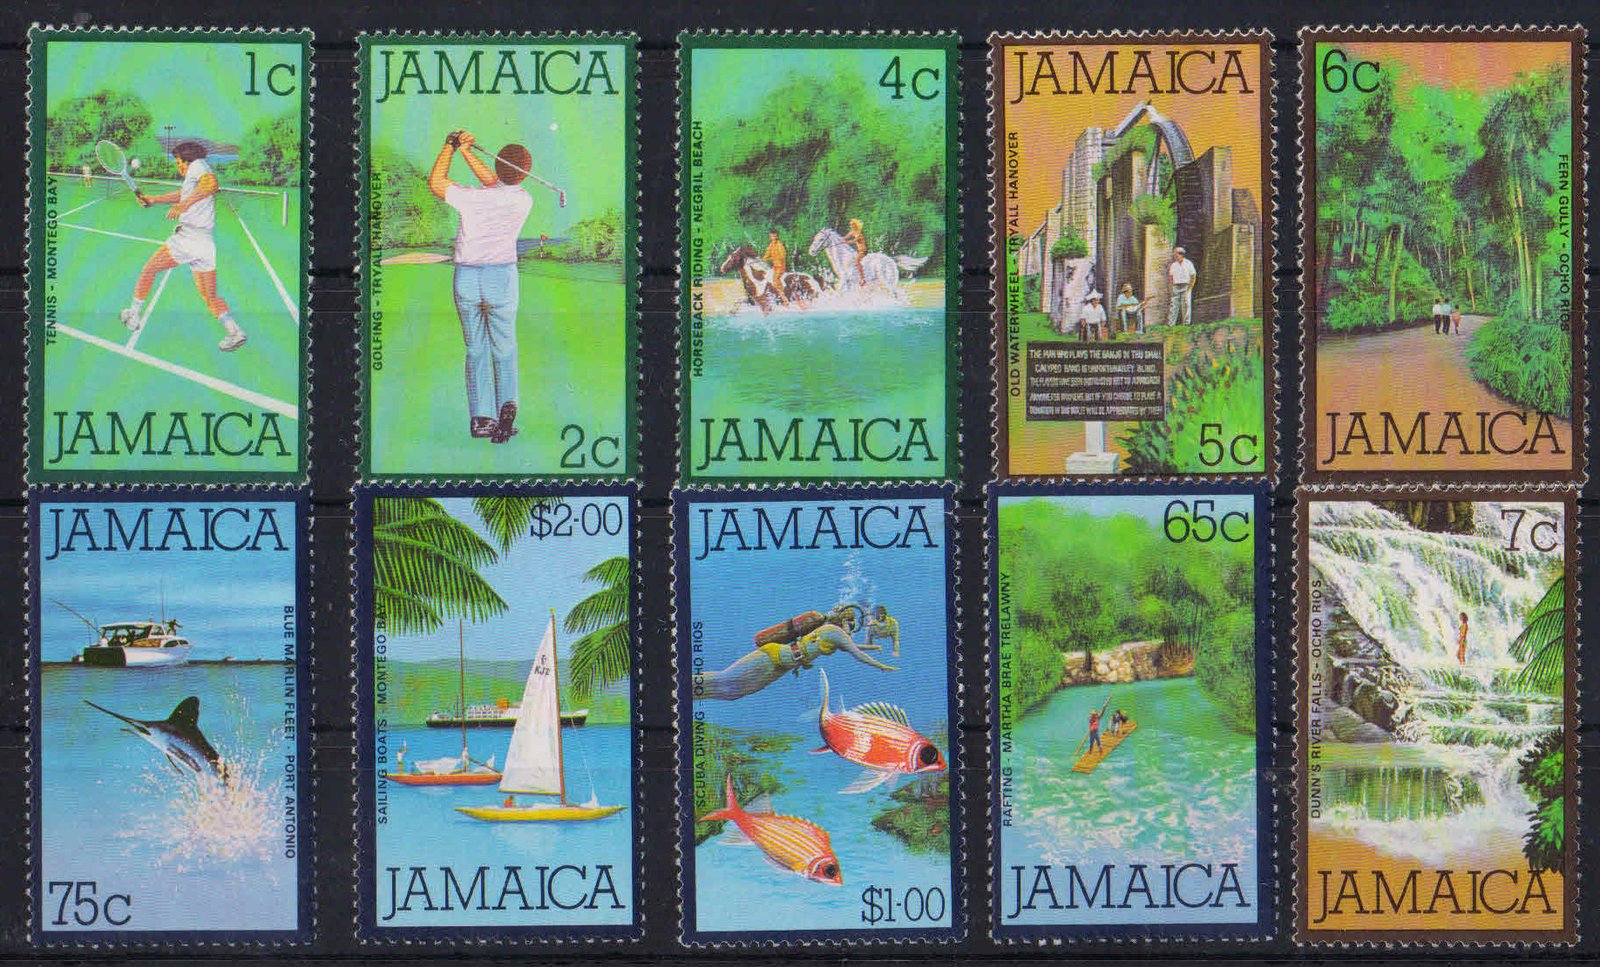 JAMAICA 1979-Pictorial Thematic Stamps-Tennis, Golf, River Falls, Diving & Sailing Boats, Set of 10, MNH, S.G. 461-476-Cat � 17-